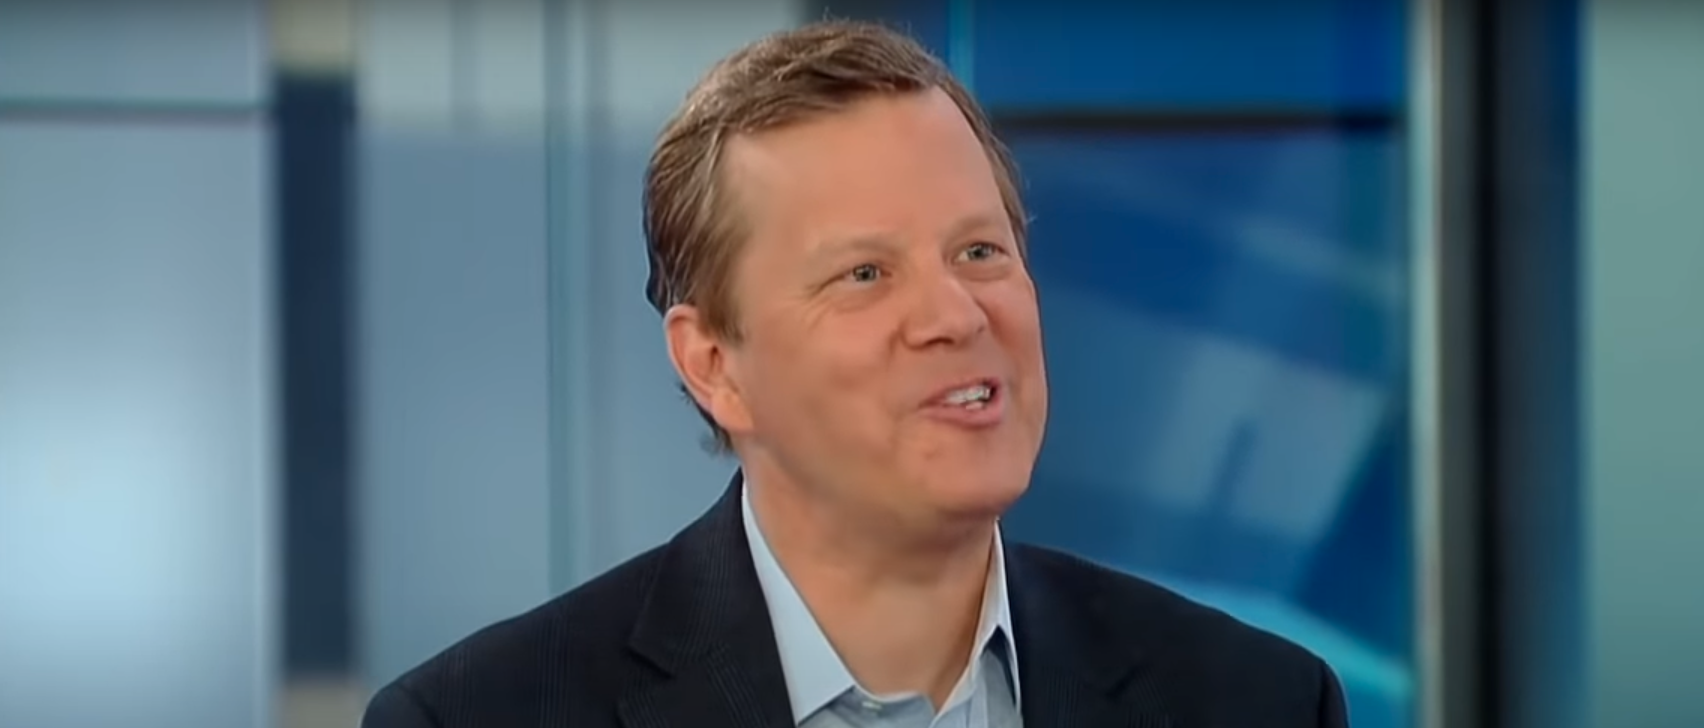 Peter Schweizer talked with Sean Hannity on the Fox News Channel about his book "Secret Empire" in March 2018. [YouTube/Screenshot/FoxNews] 